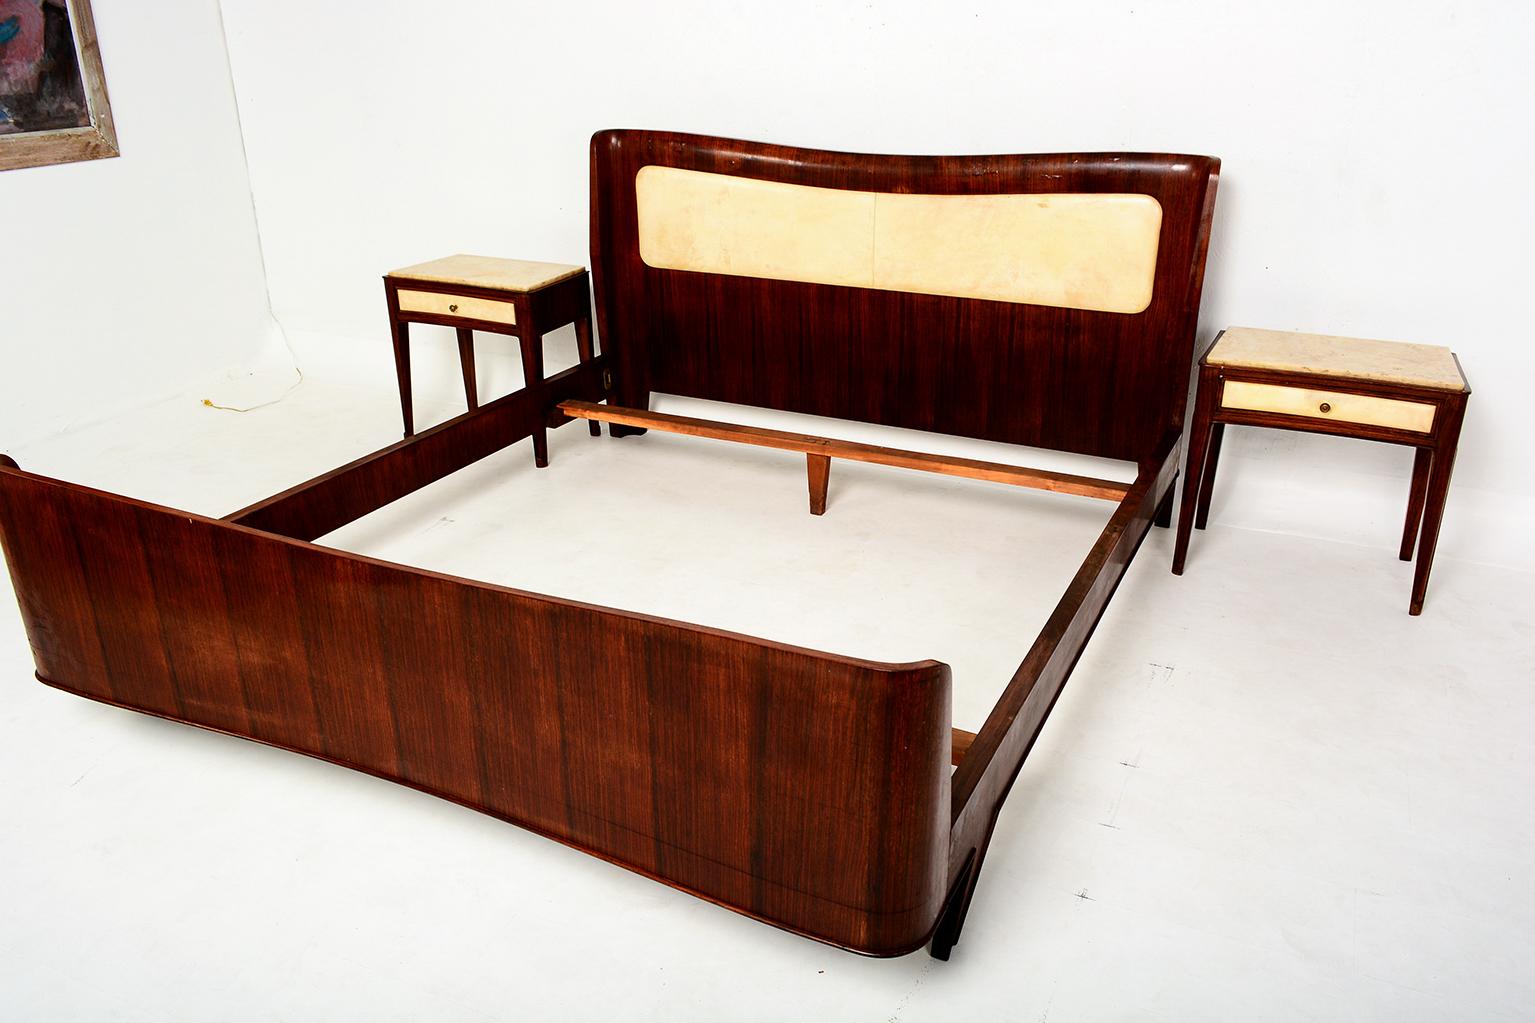 AMBIANIC presents
extravagant 1950s- Mid-Century Modern Italian Queen Bed Sculptural Frame in Warm Walnut Wood and Cool Goatskin Parchment.
The style is attributed to Paolo Buffa, Italy. No maker label.
Nightstands with single pull-out drawer